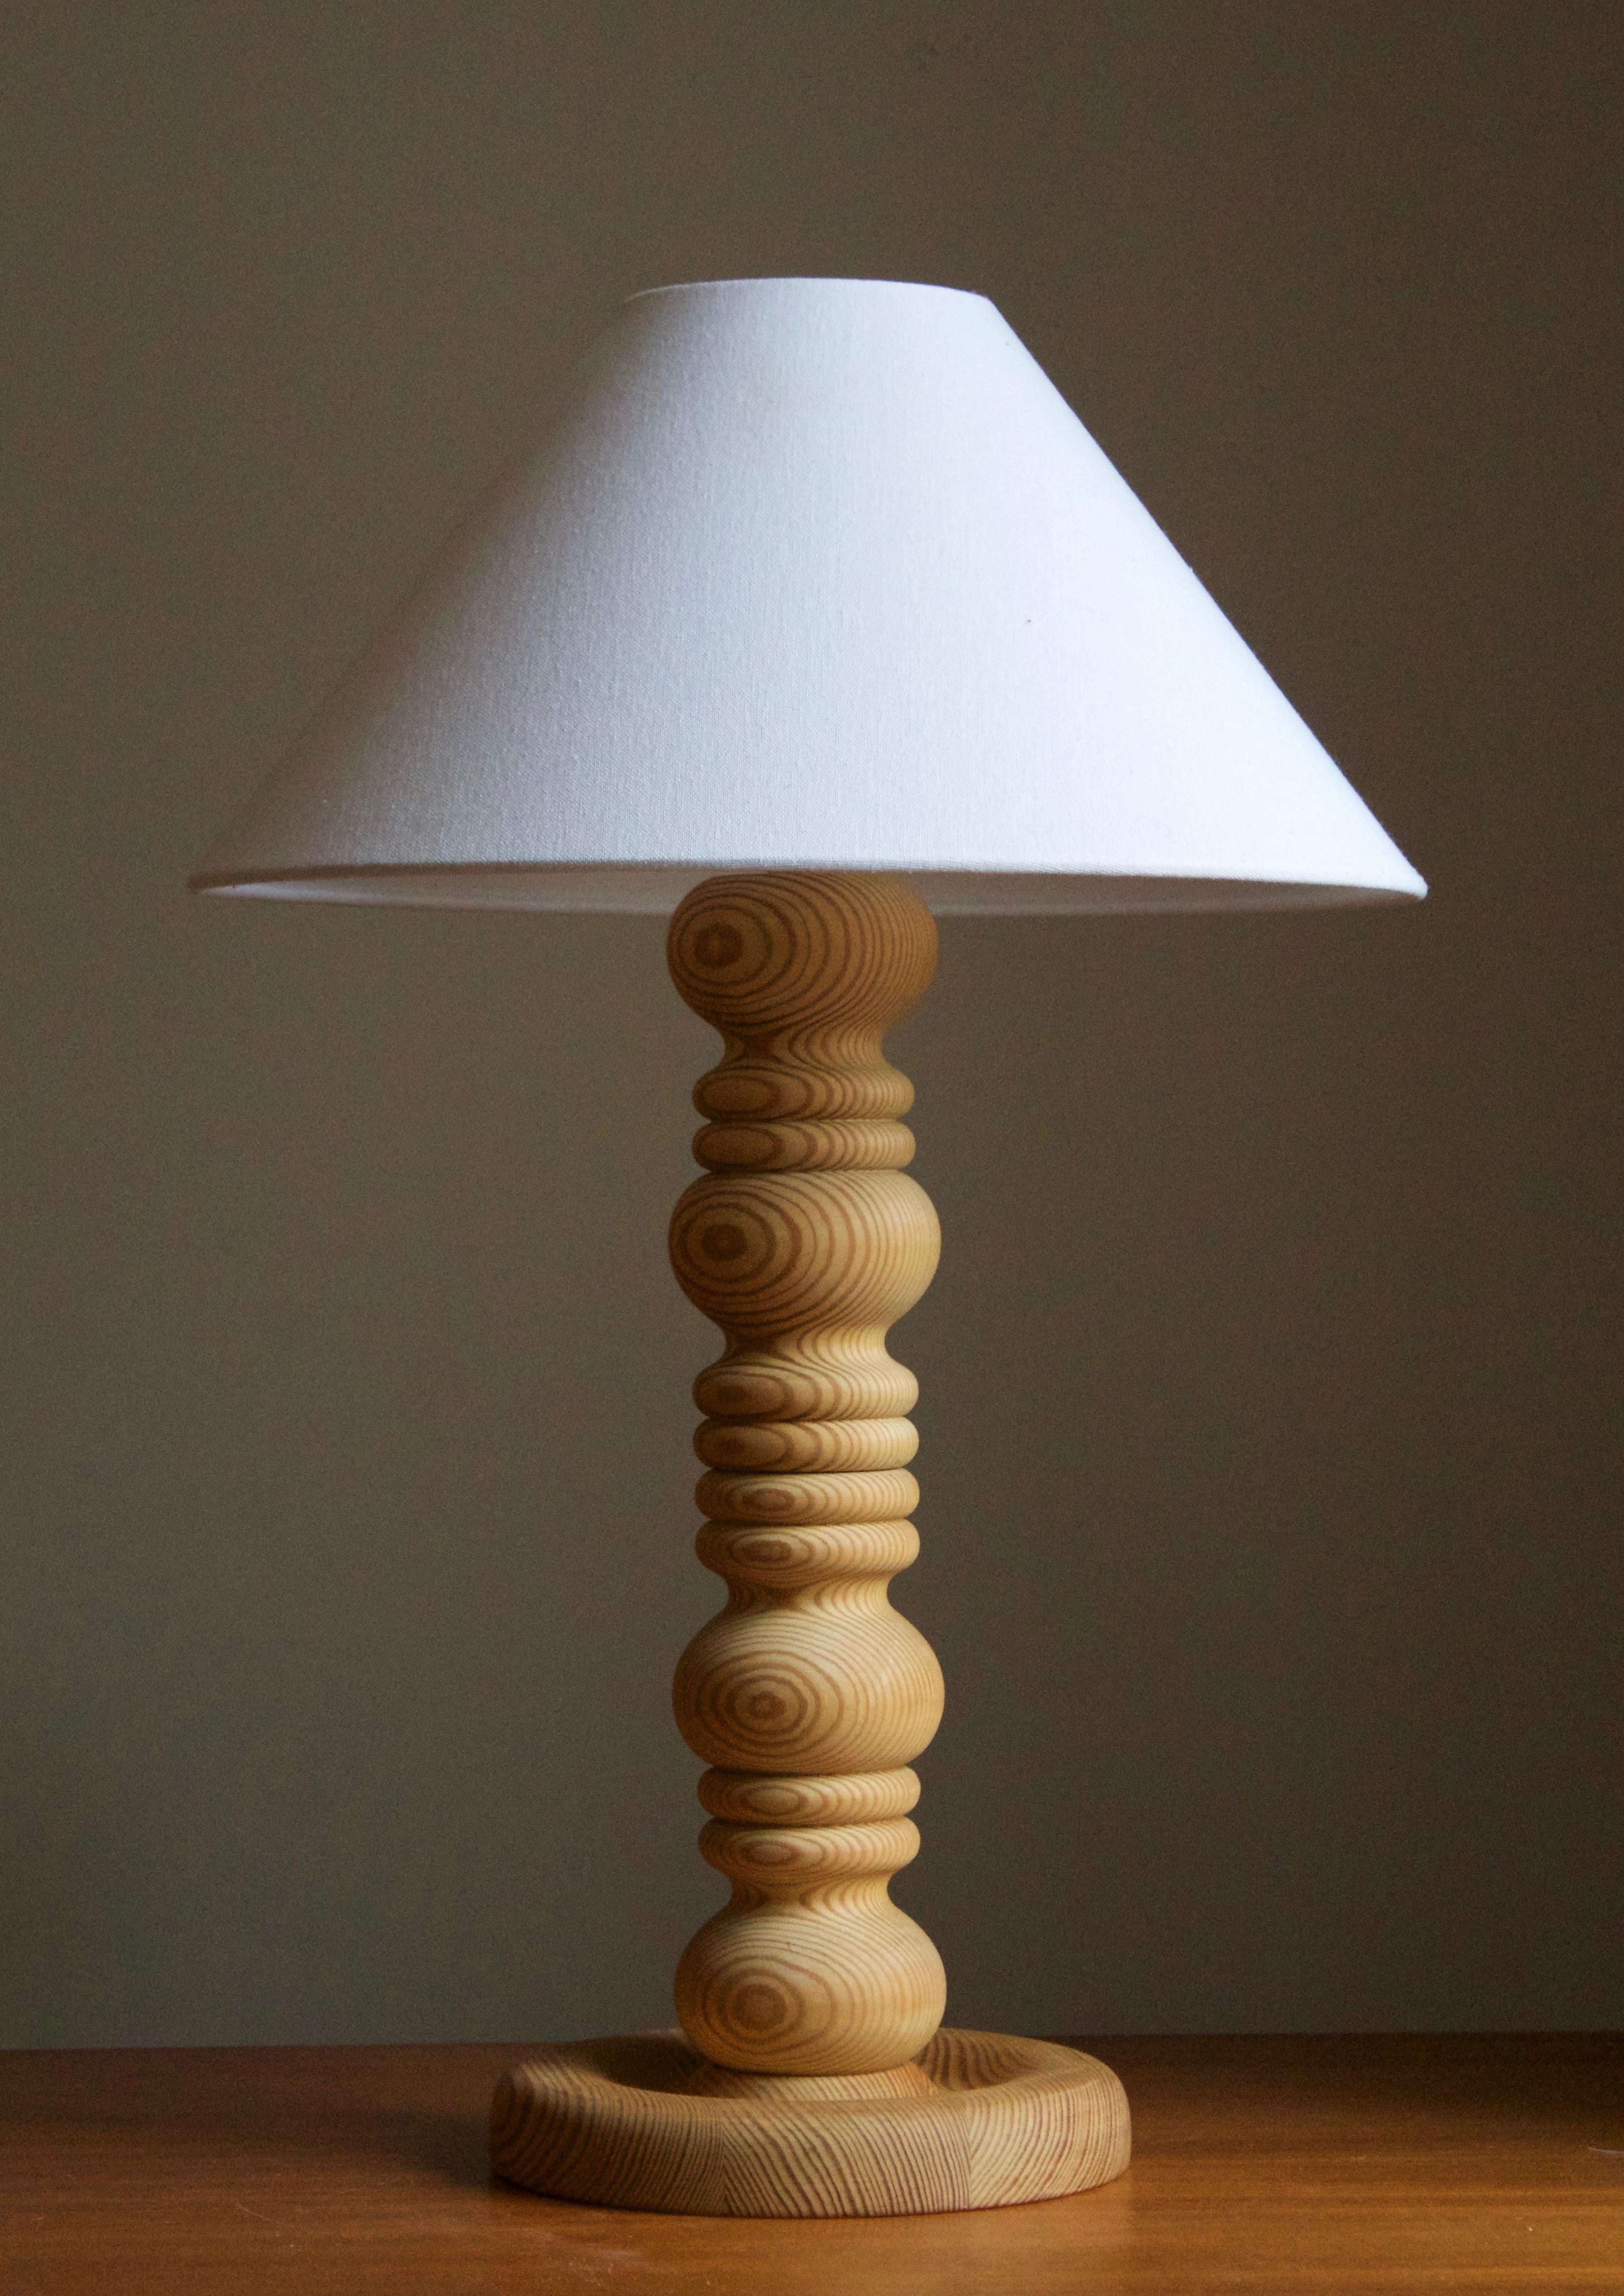 A sizable solid pine table lamp, designed and produced in Sweden, c. 1970s. 

Stated dimensions exclude lampshade. Height includes socket. Sold without lampshade.